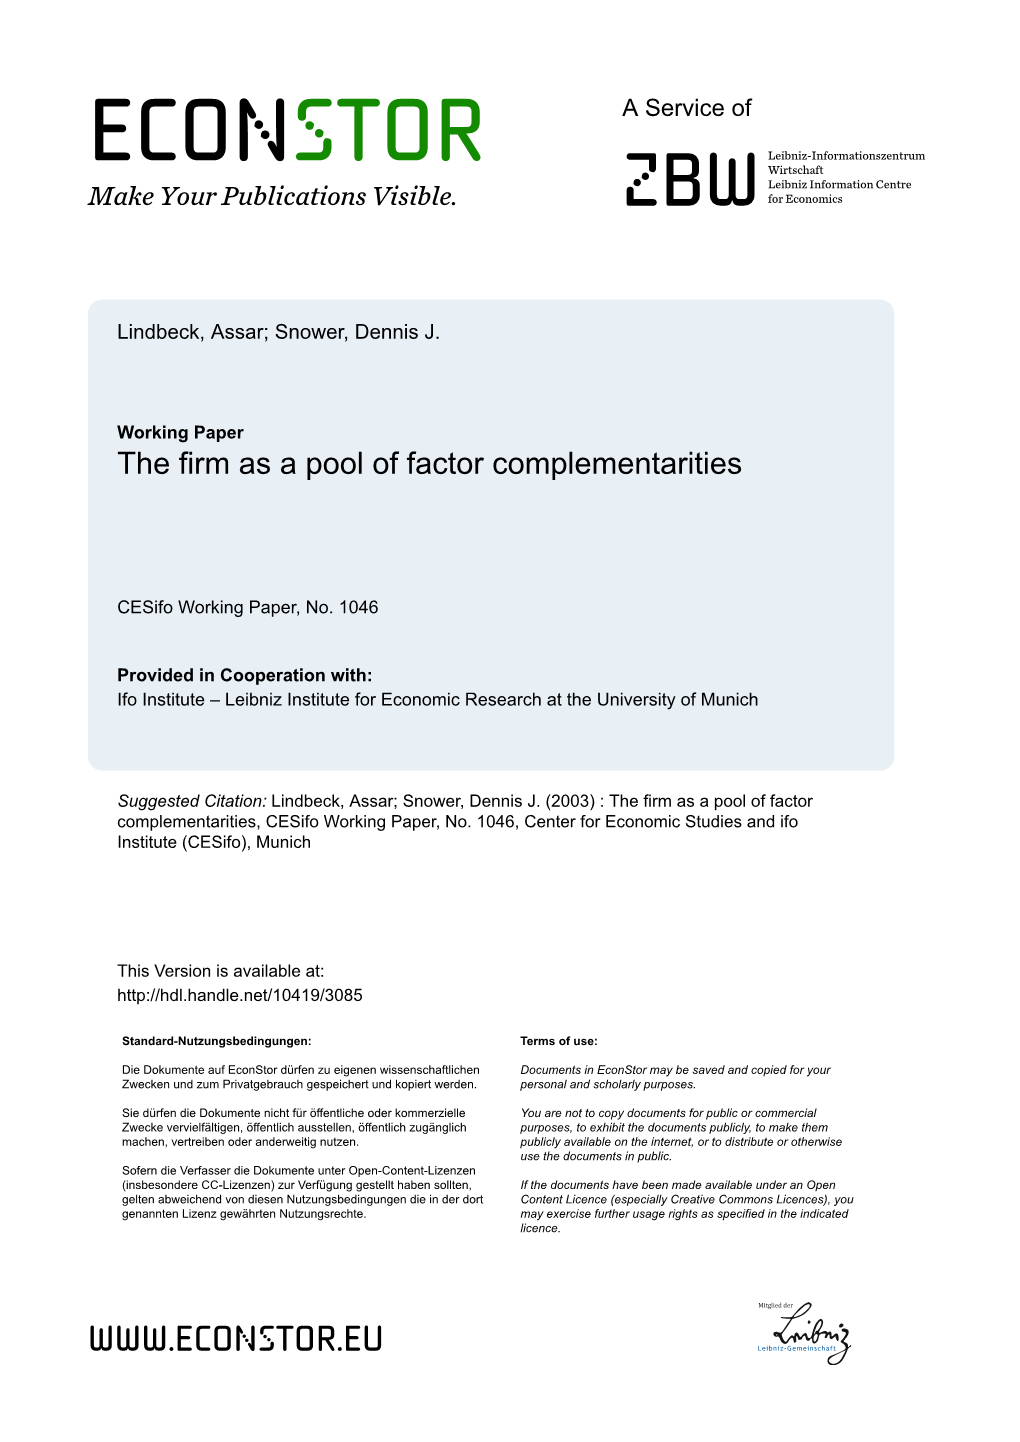 The Firm As a Pool of Factor Complementarities